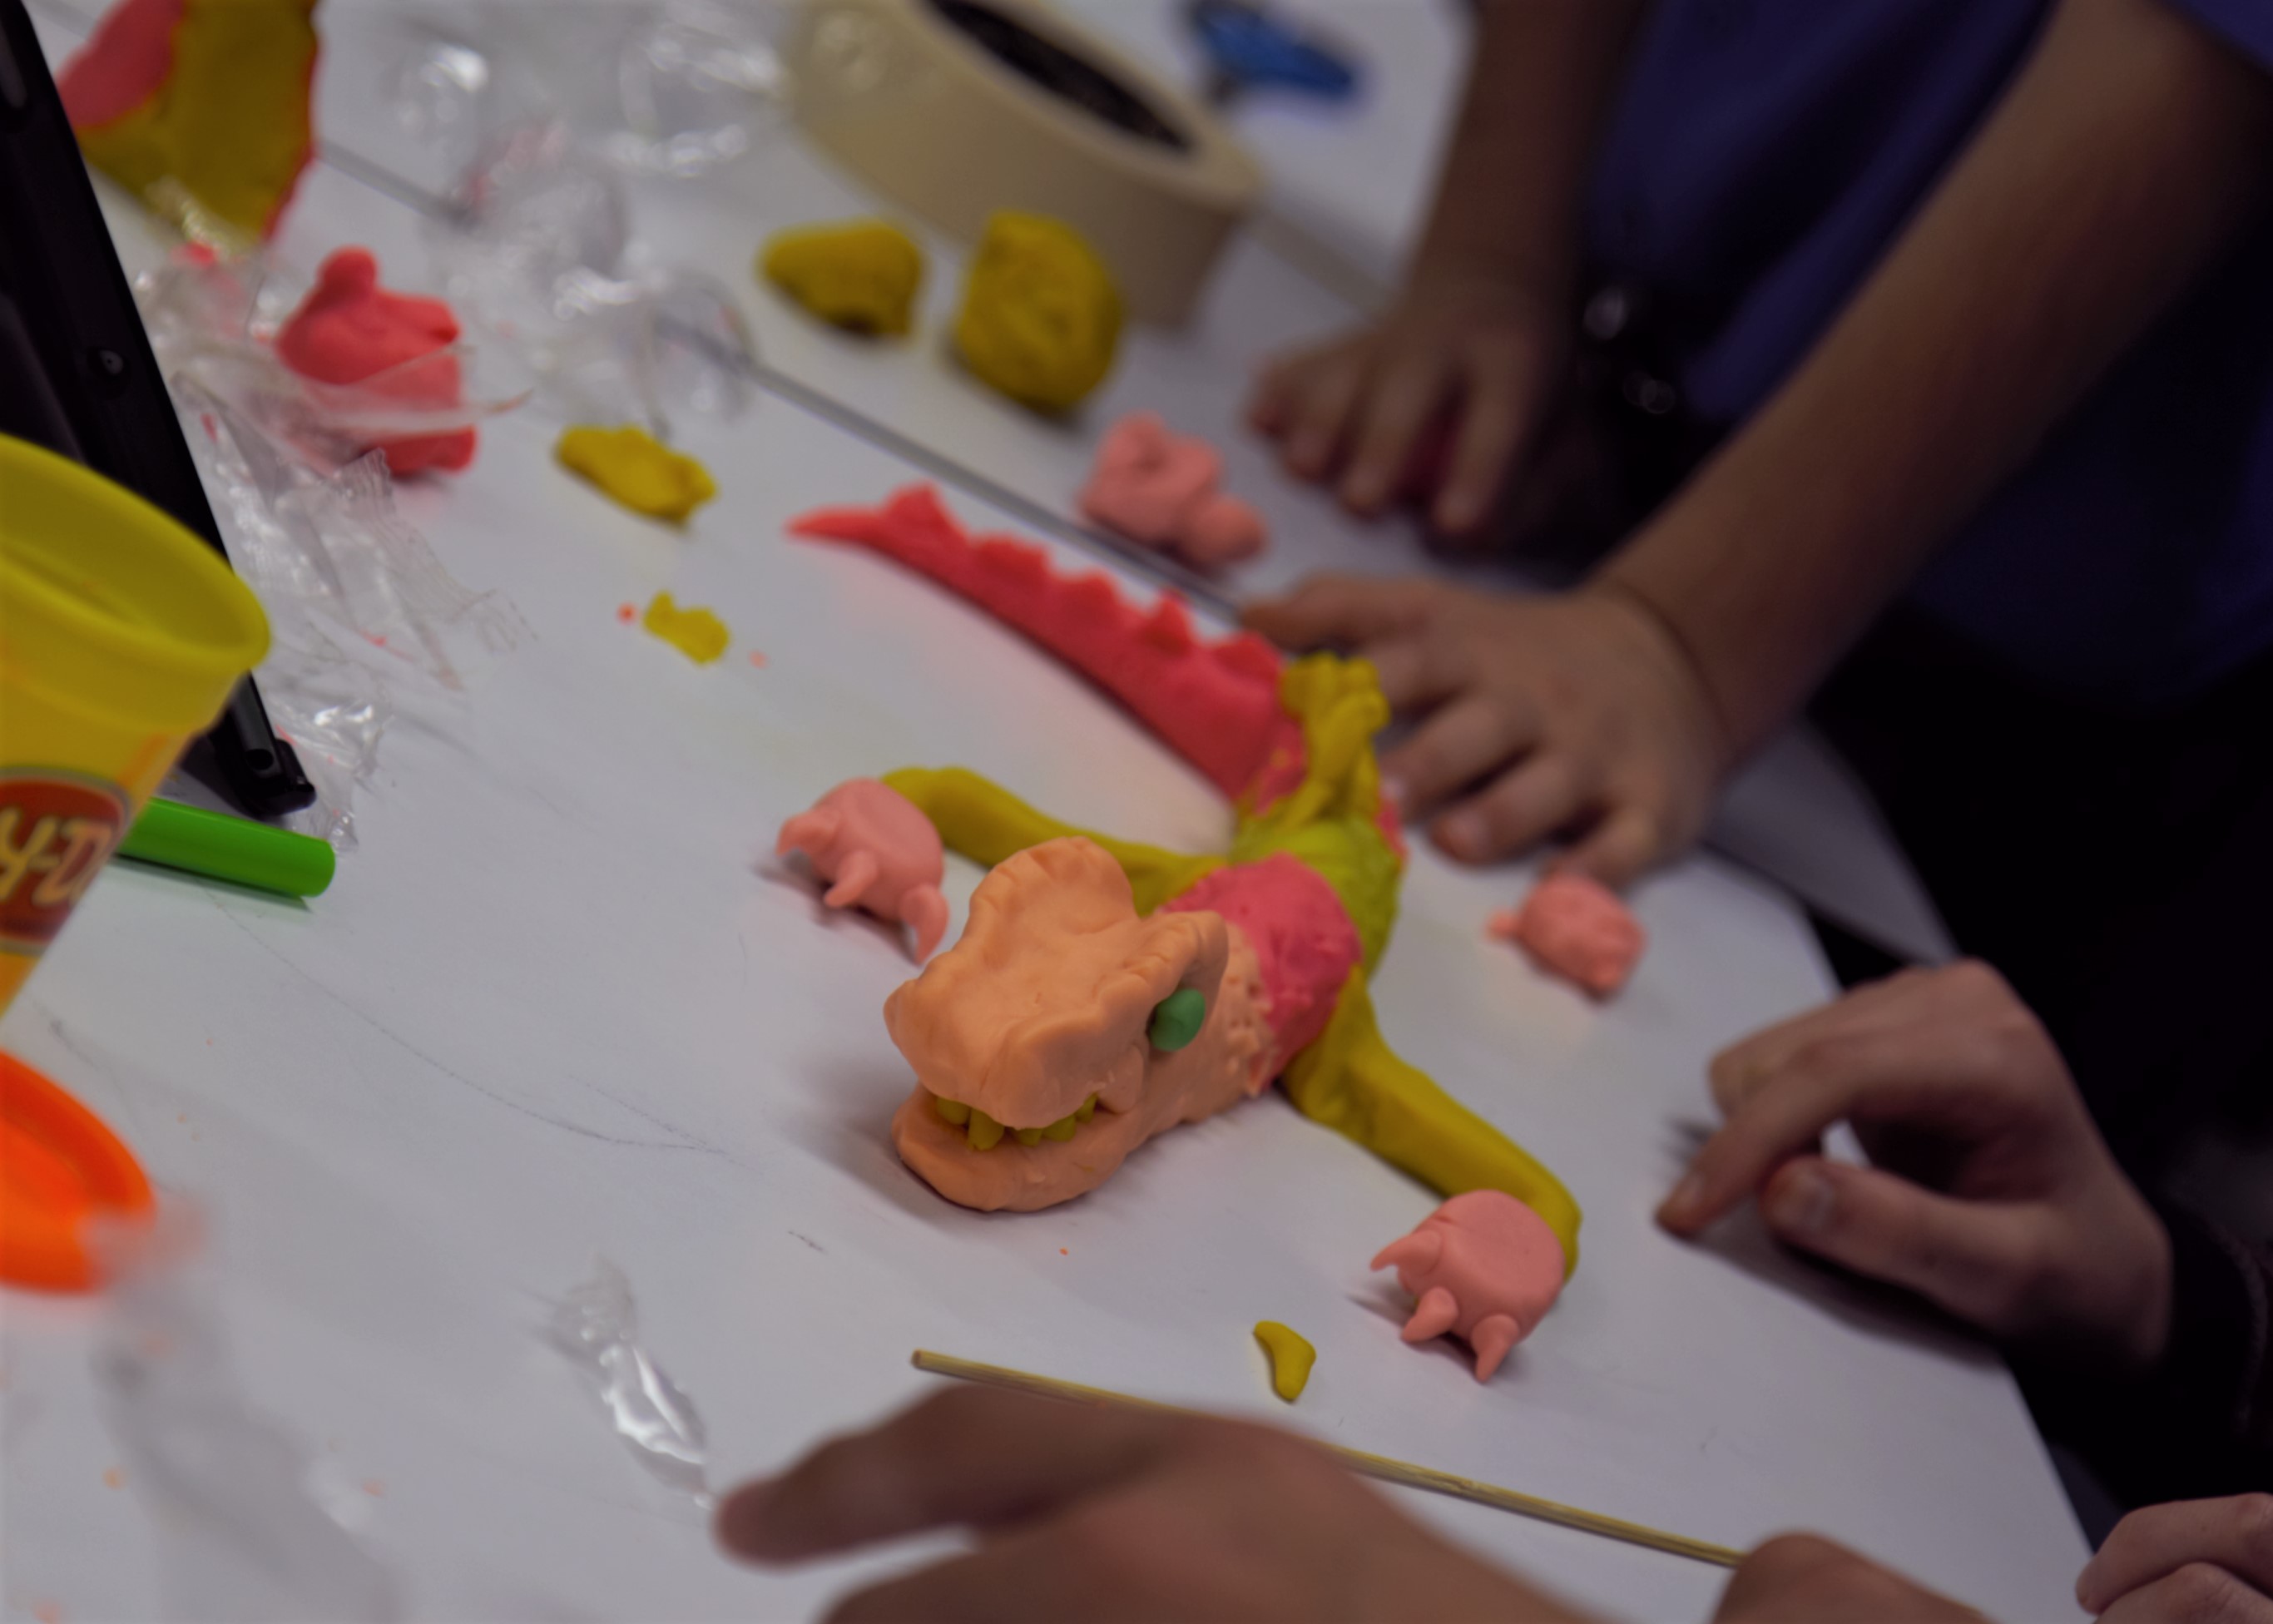 Model dragon made with plasticine and hands of children on table